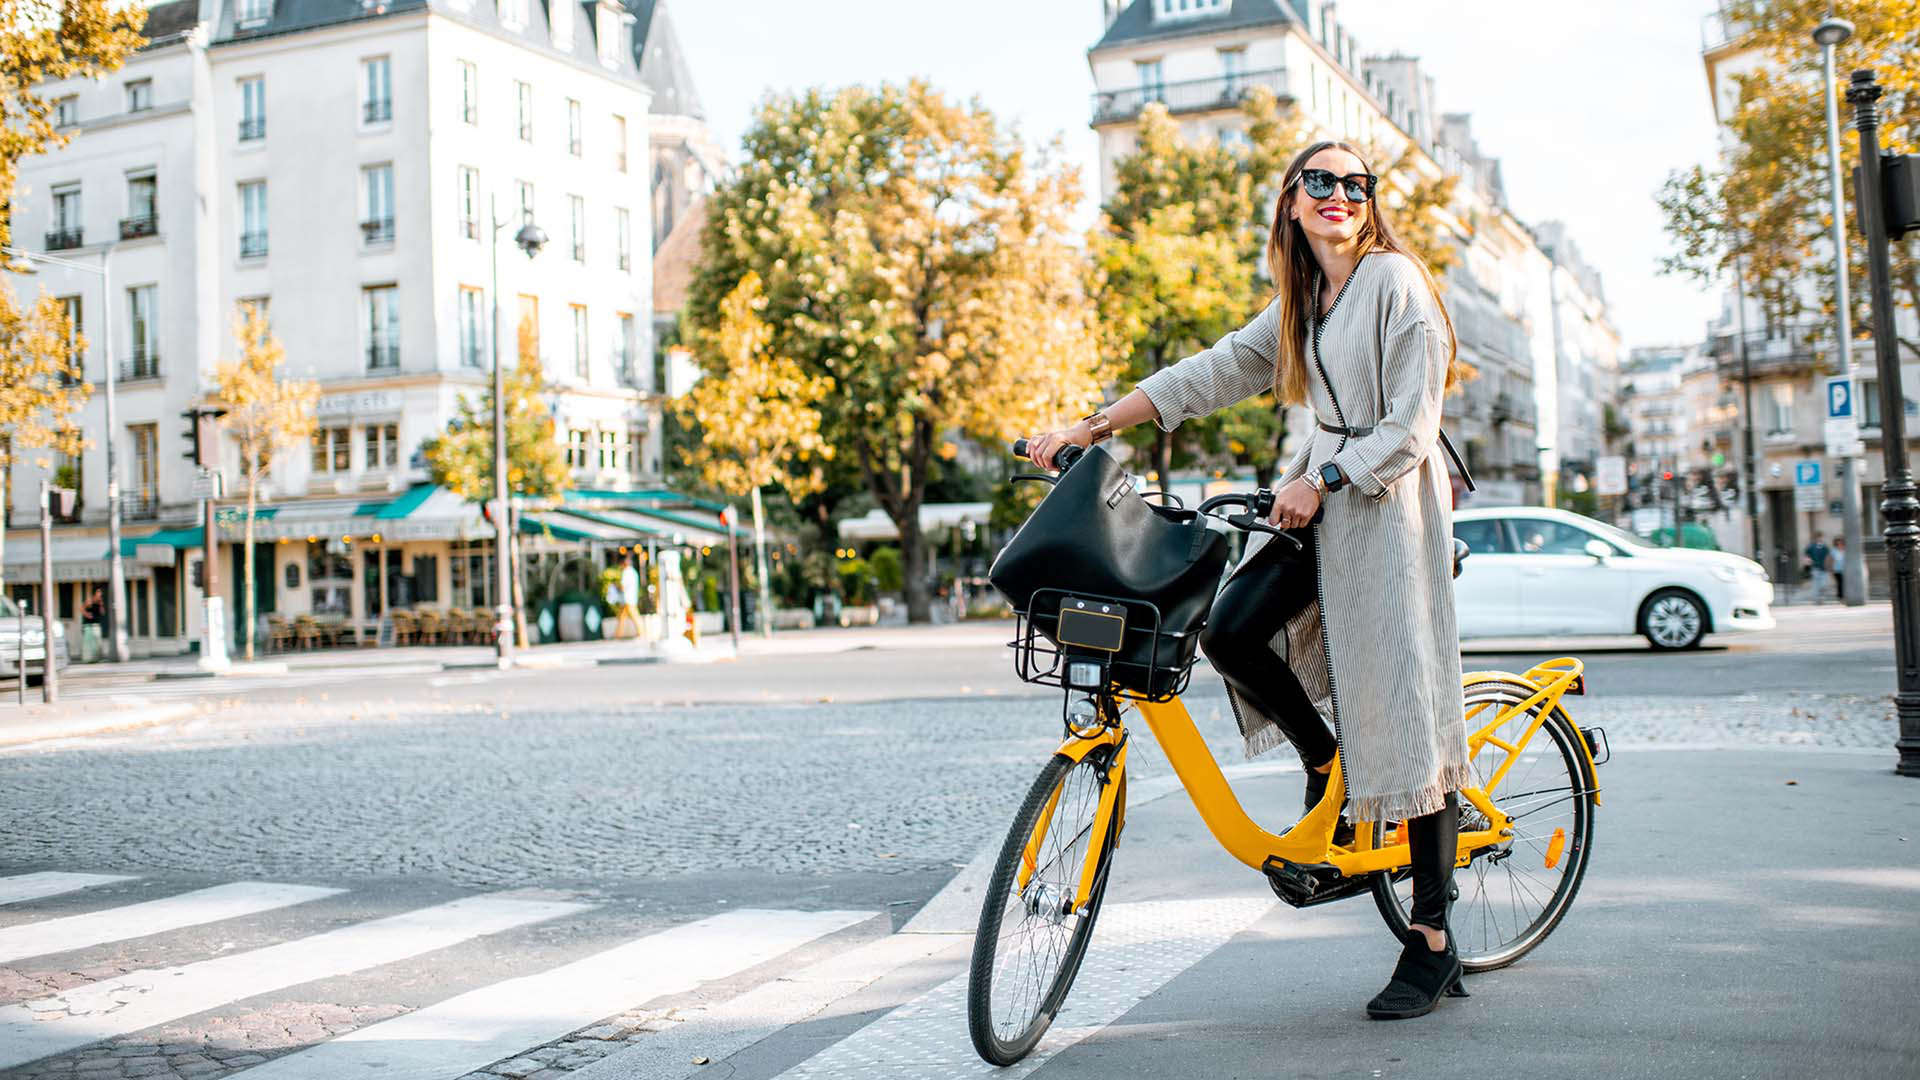 A woman wearing sunglasses cycling in Paris, France